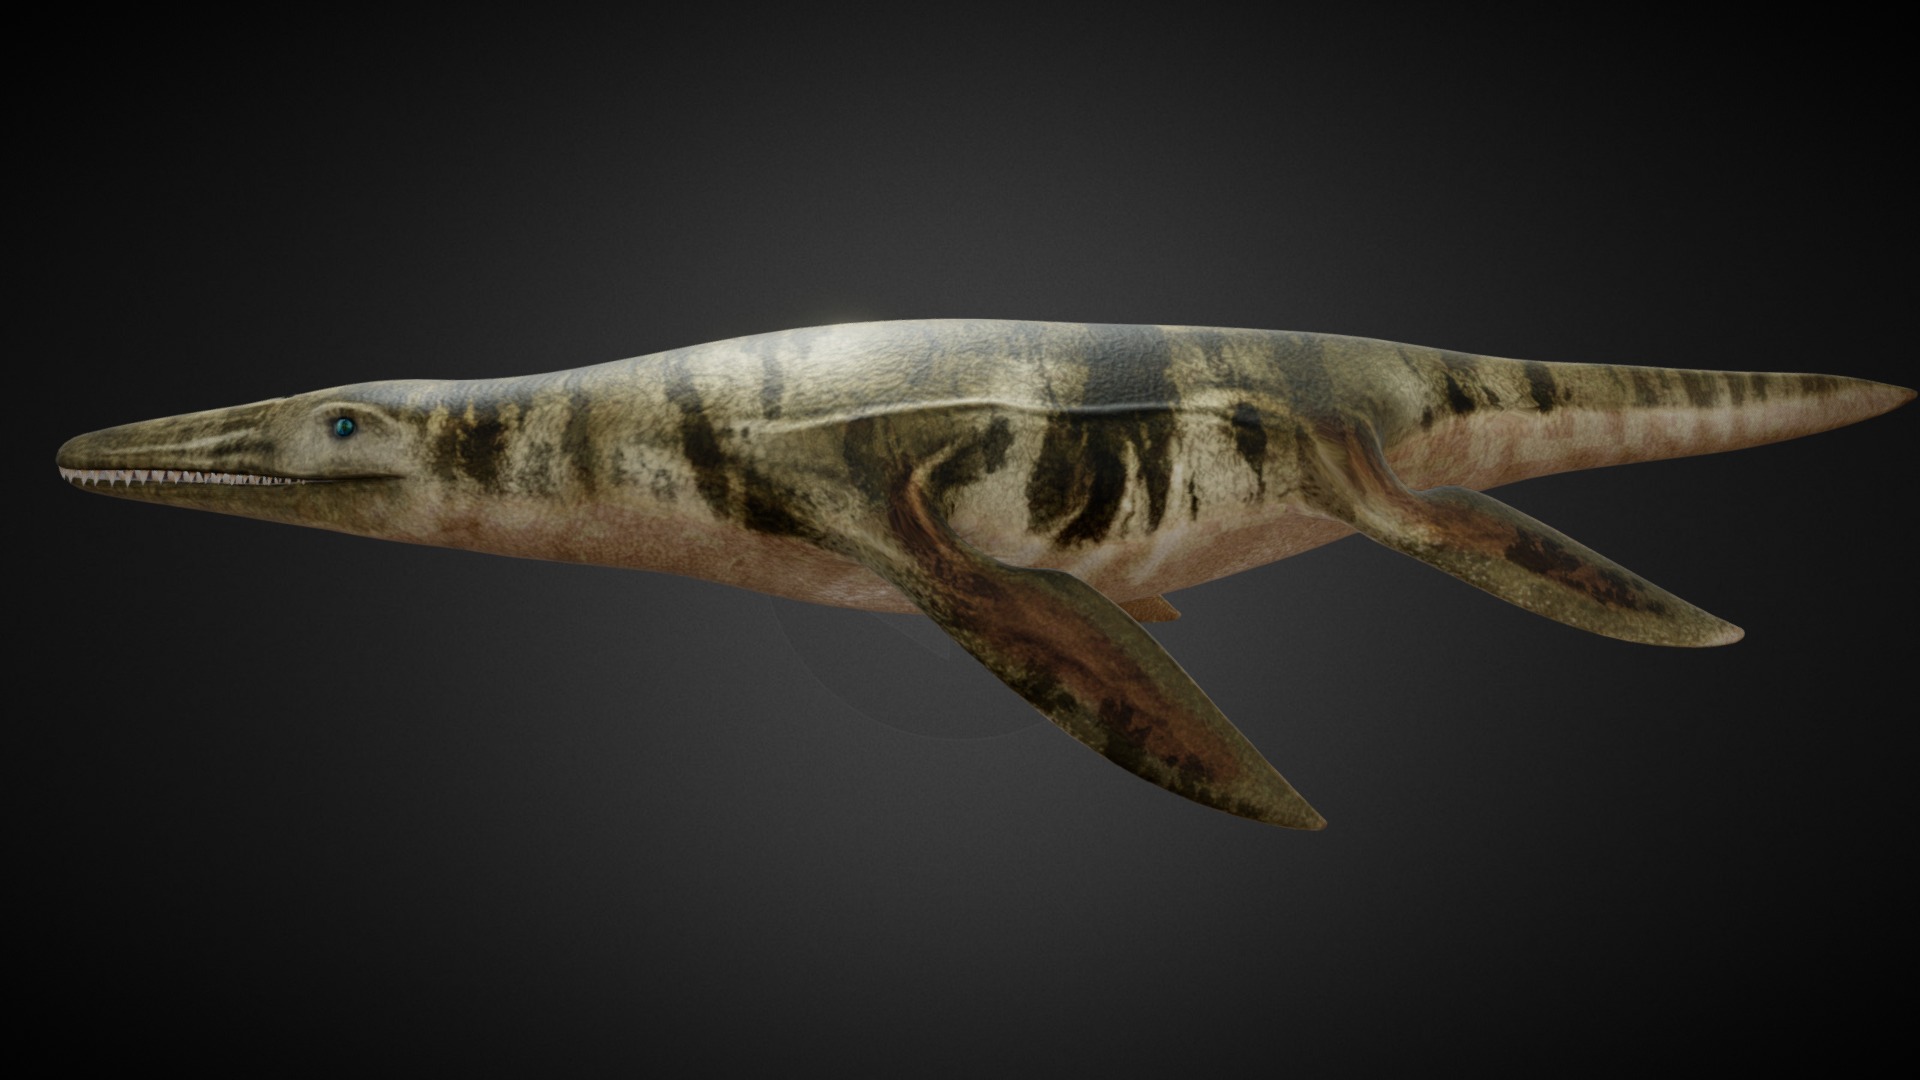 3D model Ocean Pliosaur Mosasaurus - This is a 3D model of the Ocean Pliosaur Mosasaurus. The 3D model is about a fish with a long tail.